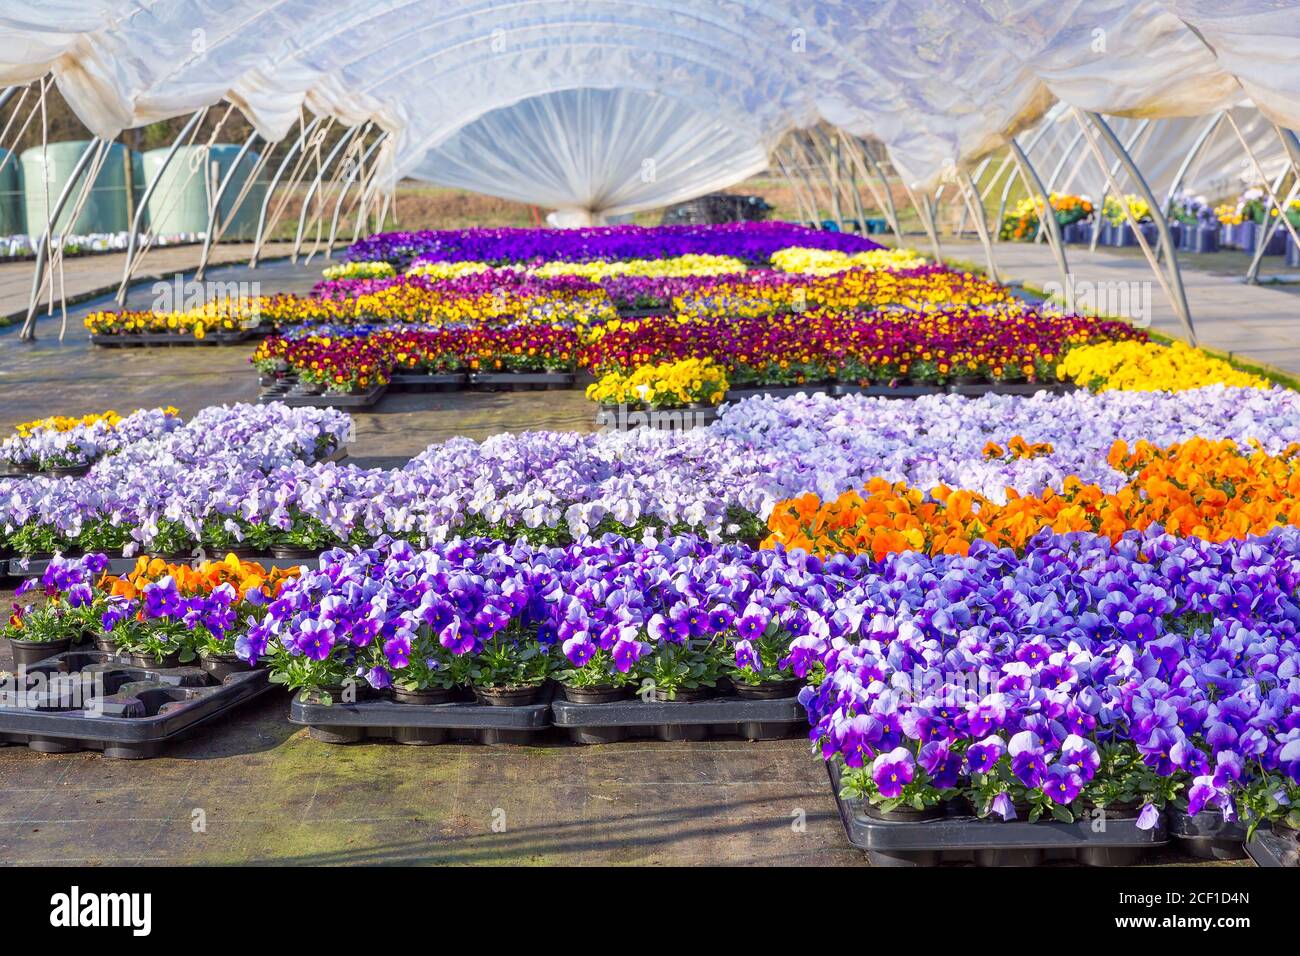 Dutch plastic  greenhouse with  path and colorful flourishing pansies Stock Photo